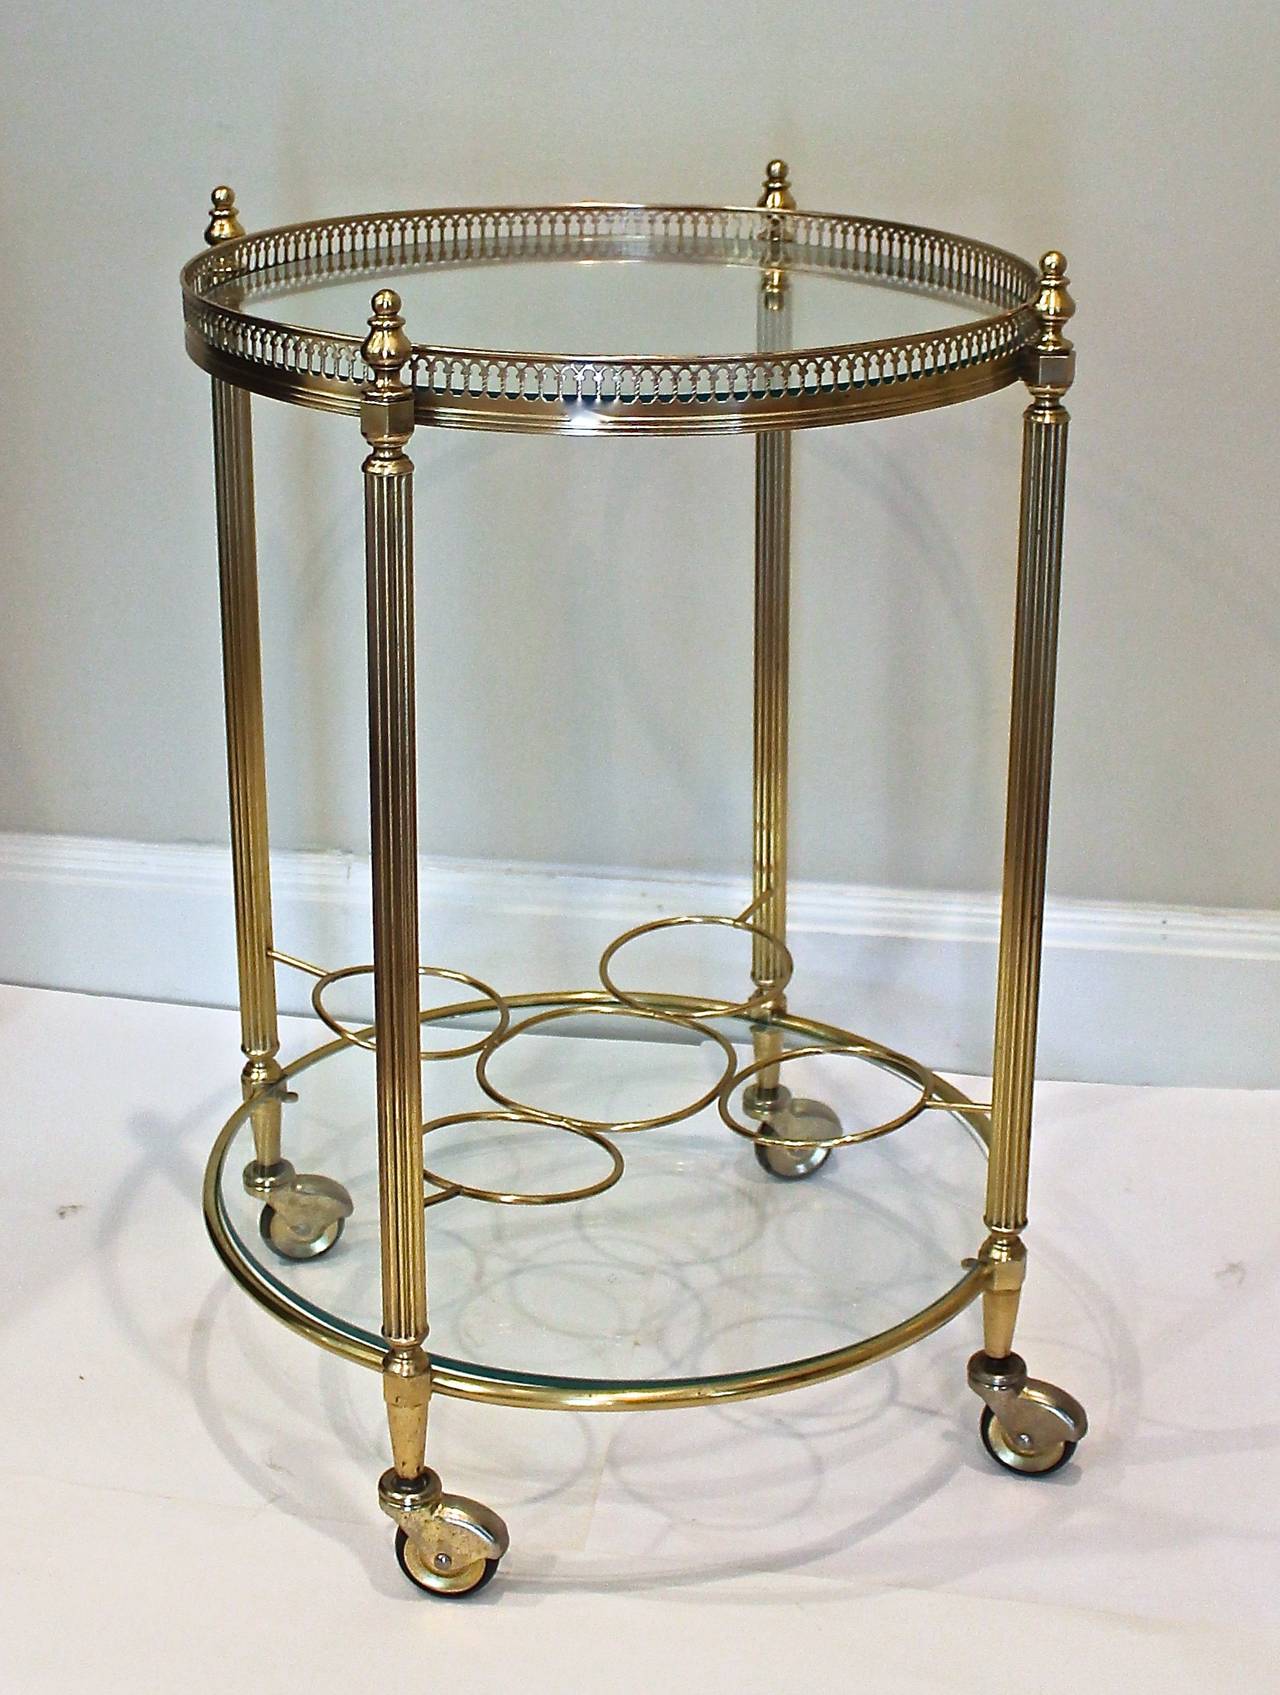 French diminutive 2 tier brass bar cart on casters with glass inset shelves and bottle holder.